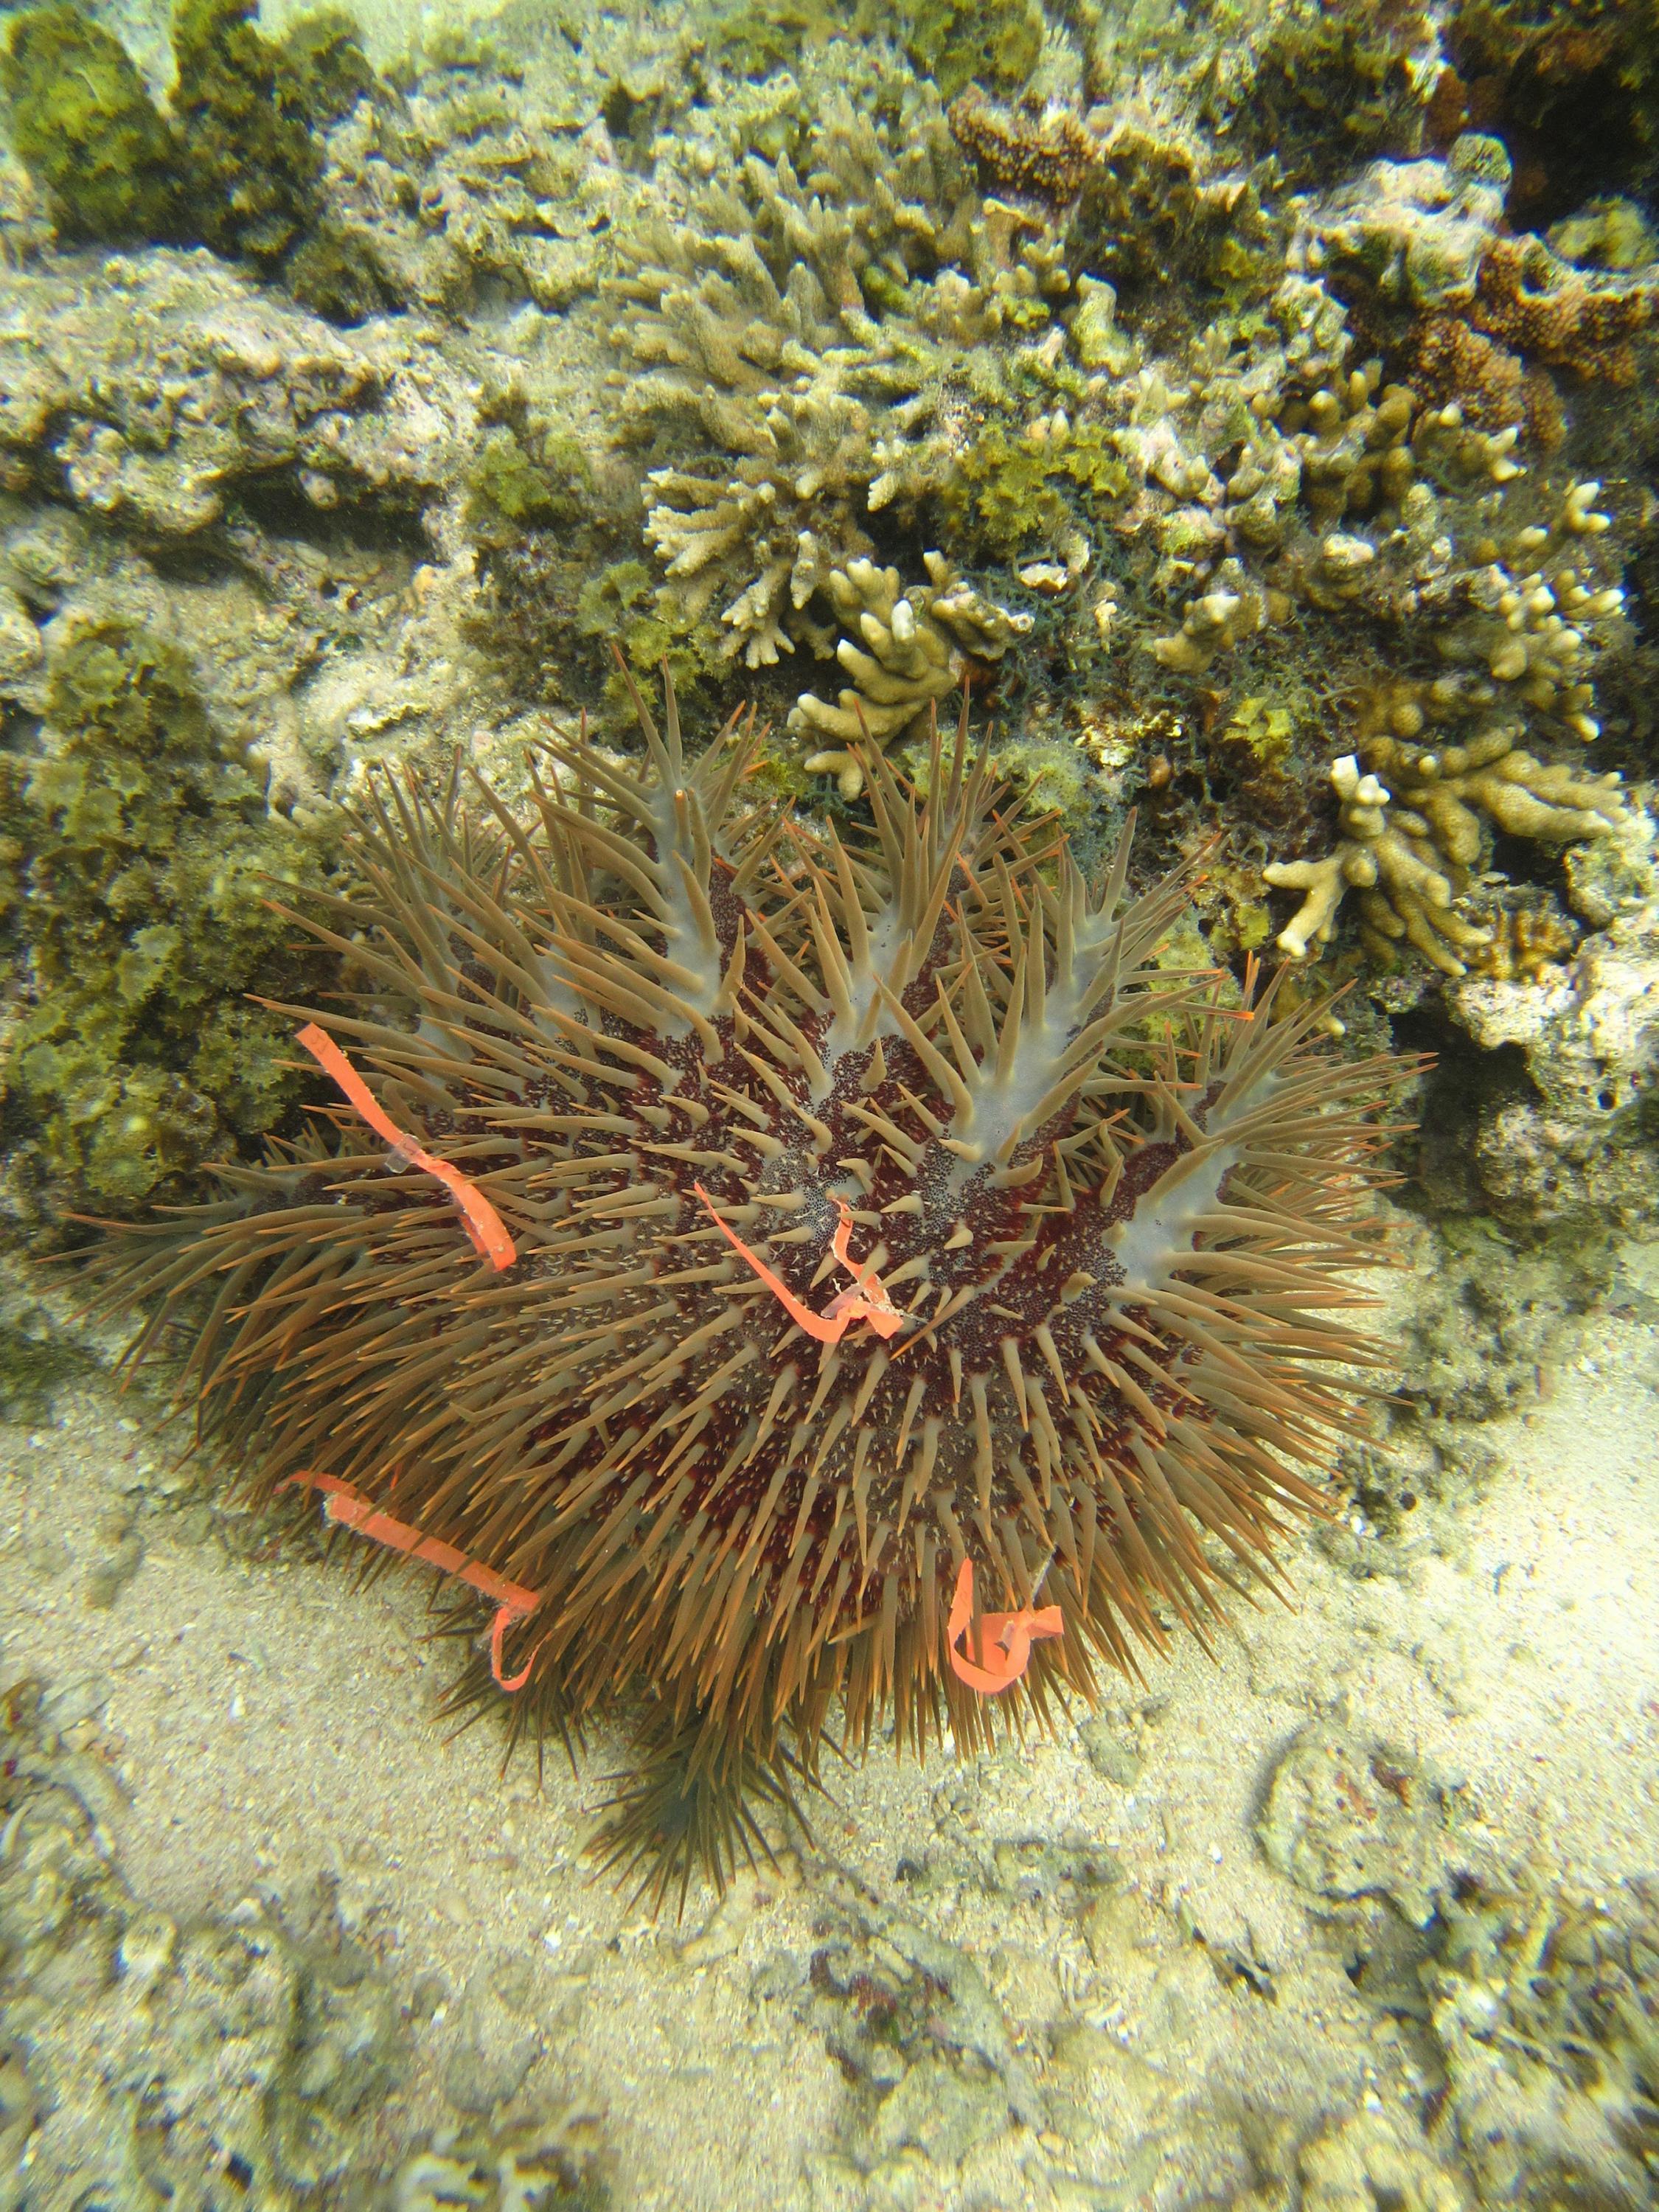 To track individual sea stars as they moved through coral reef ecosystems, Georgia Tech researchers tagged them. (Credit: Cody Clements, Georgia Tech)